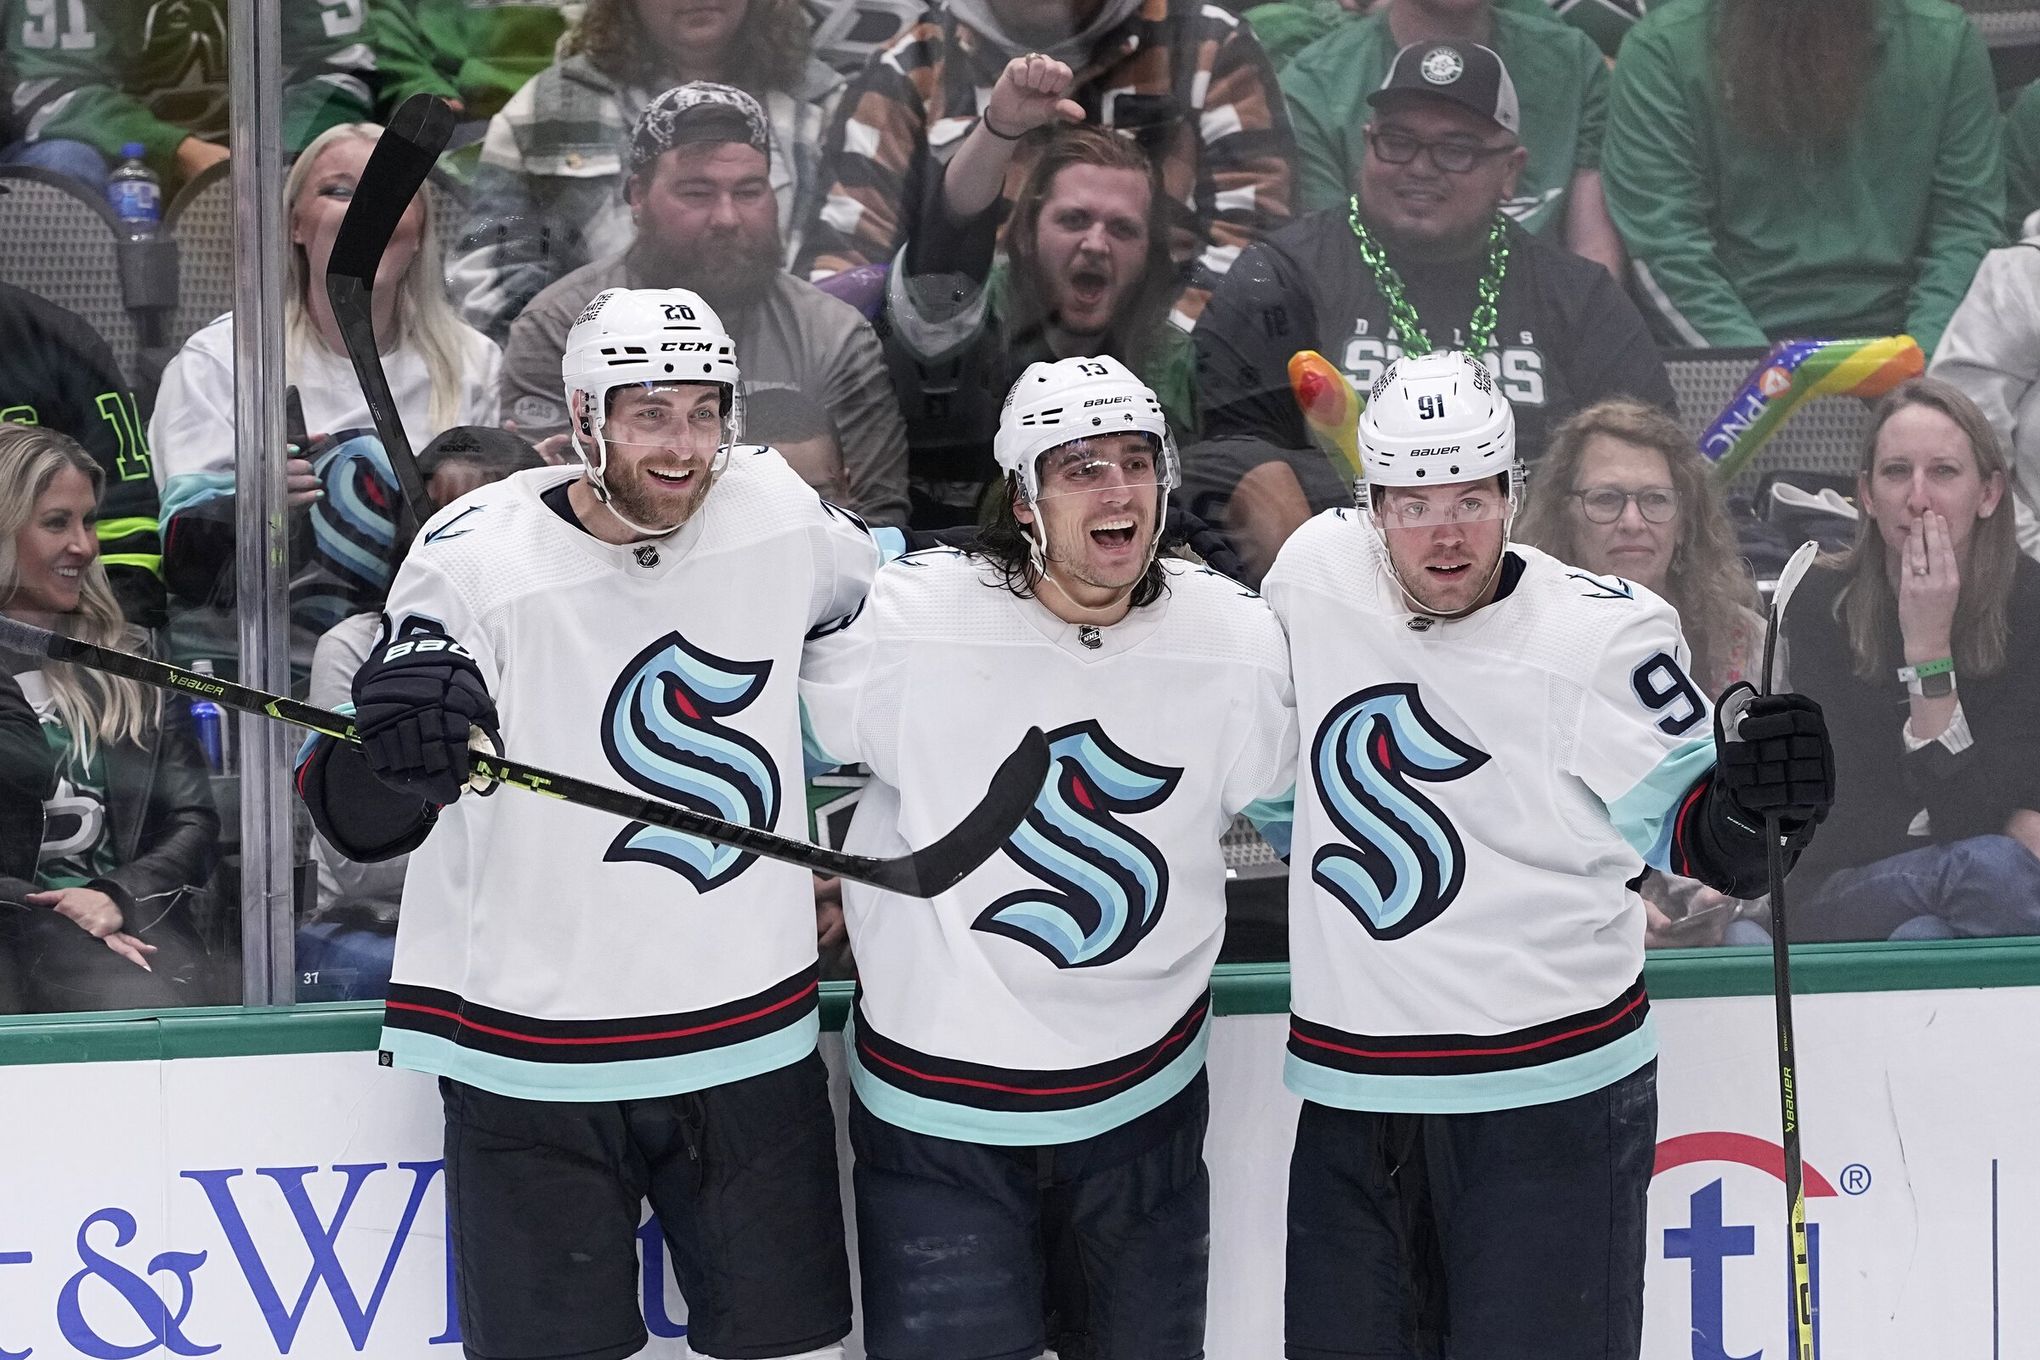 NHL jersey power rankings: Original Six teams are tough to beat